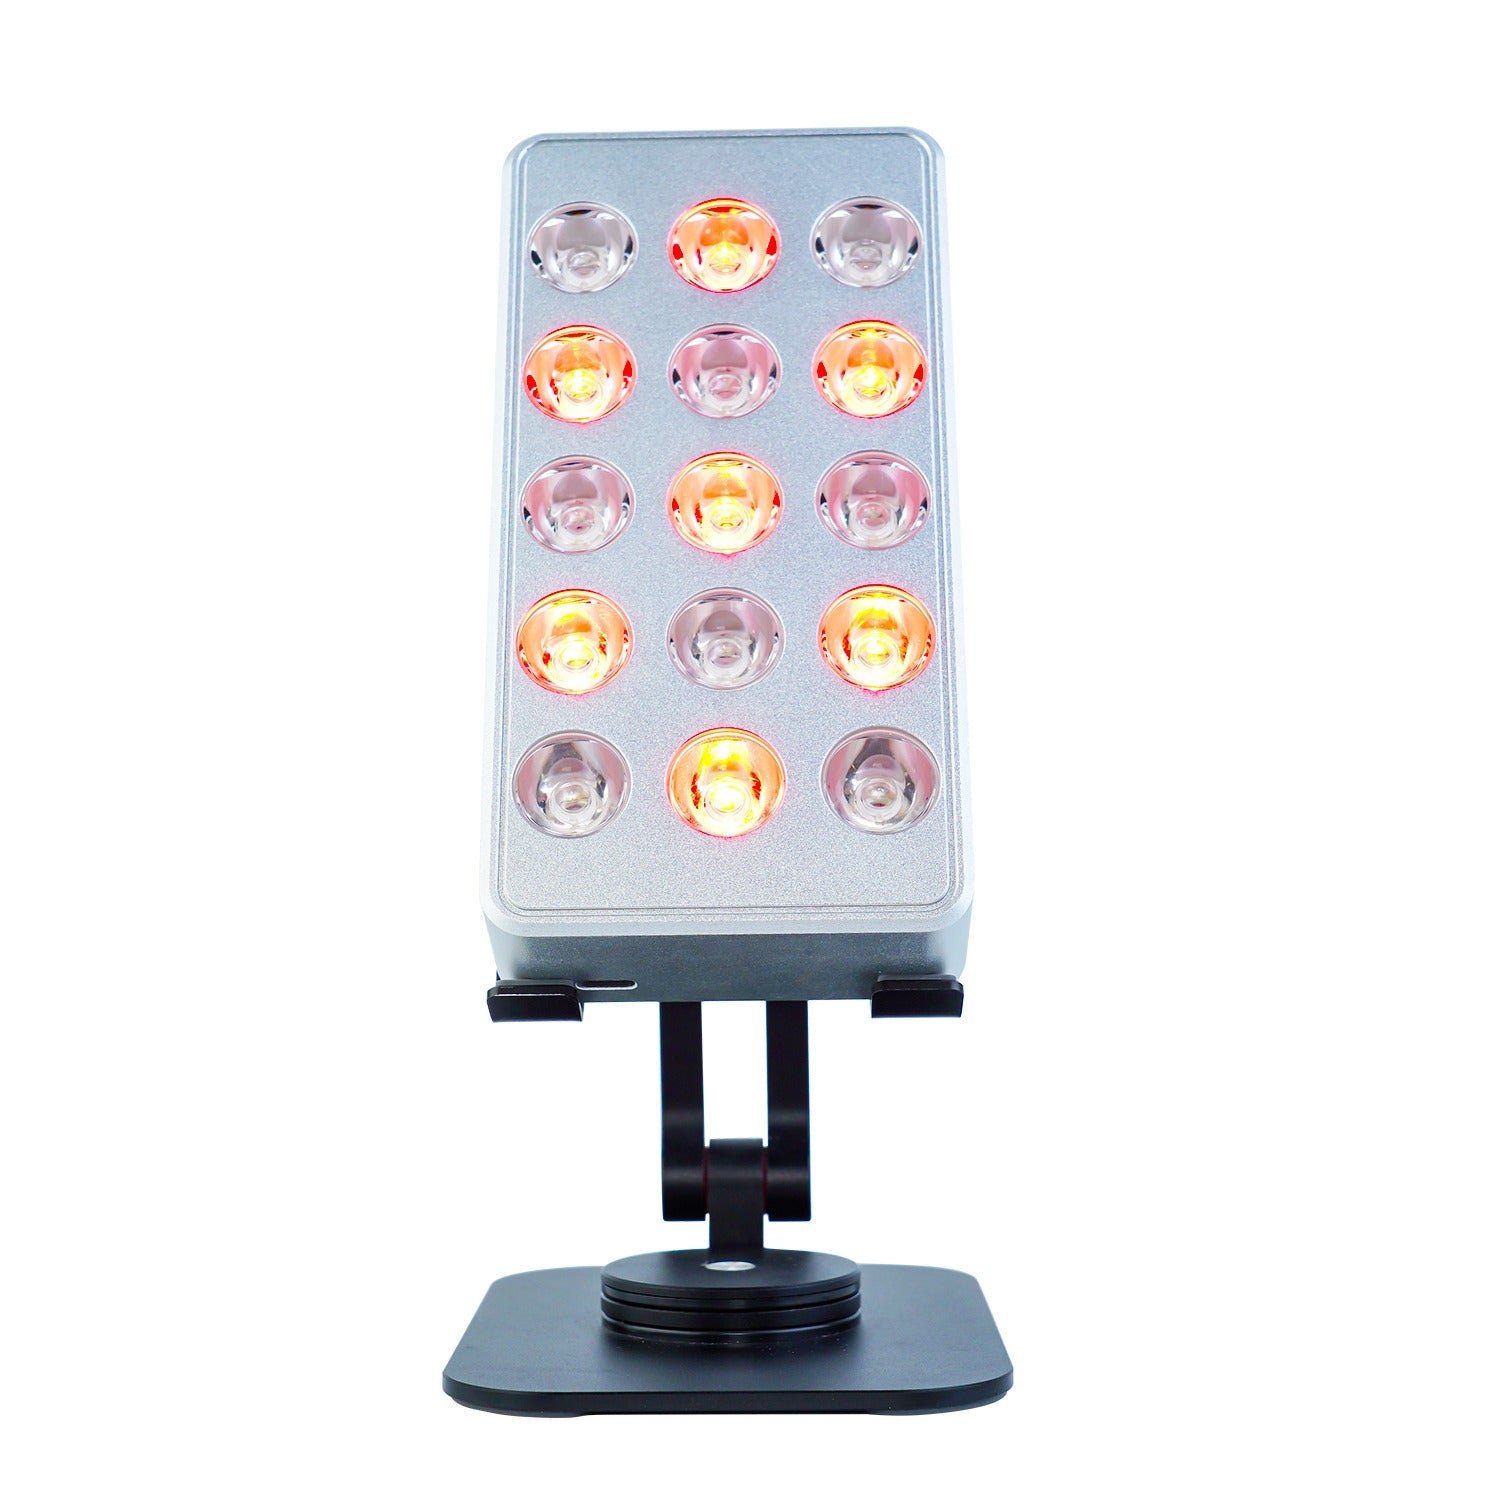 Red Light Therapy PowerPanel Portable